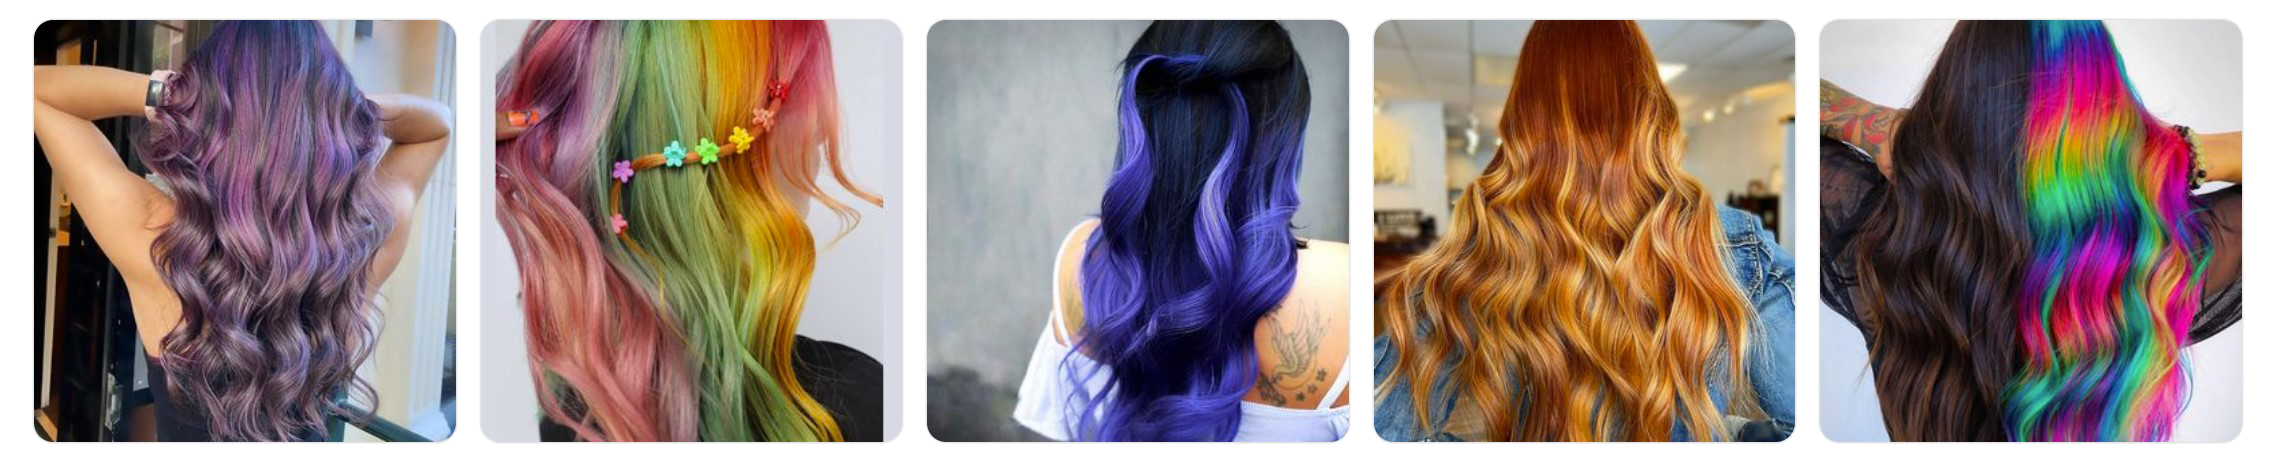 Pulp Riot vibrant and fantasy hair colorists in Grand Rapids MI - Hairtology.Salon